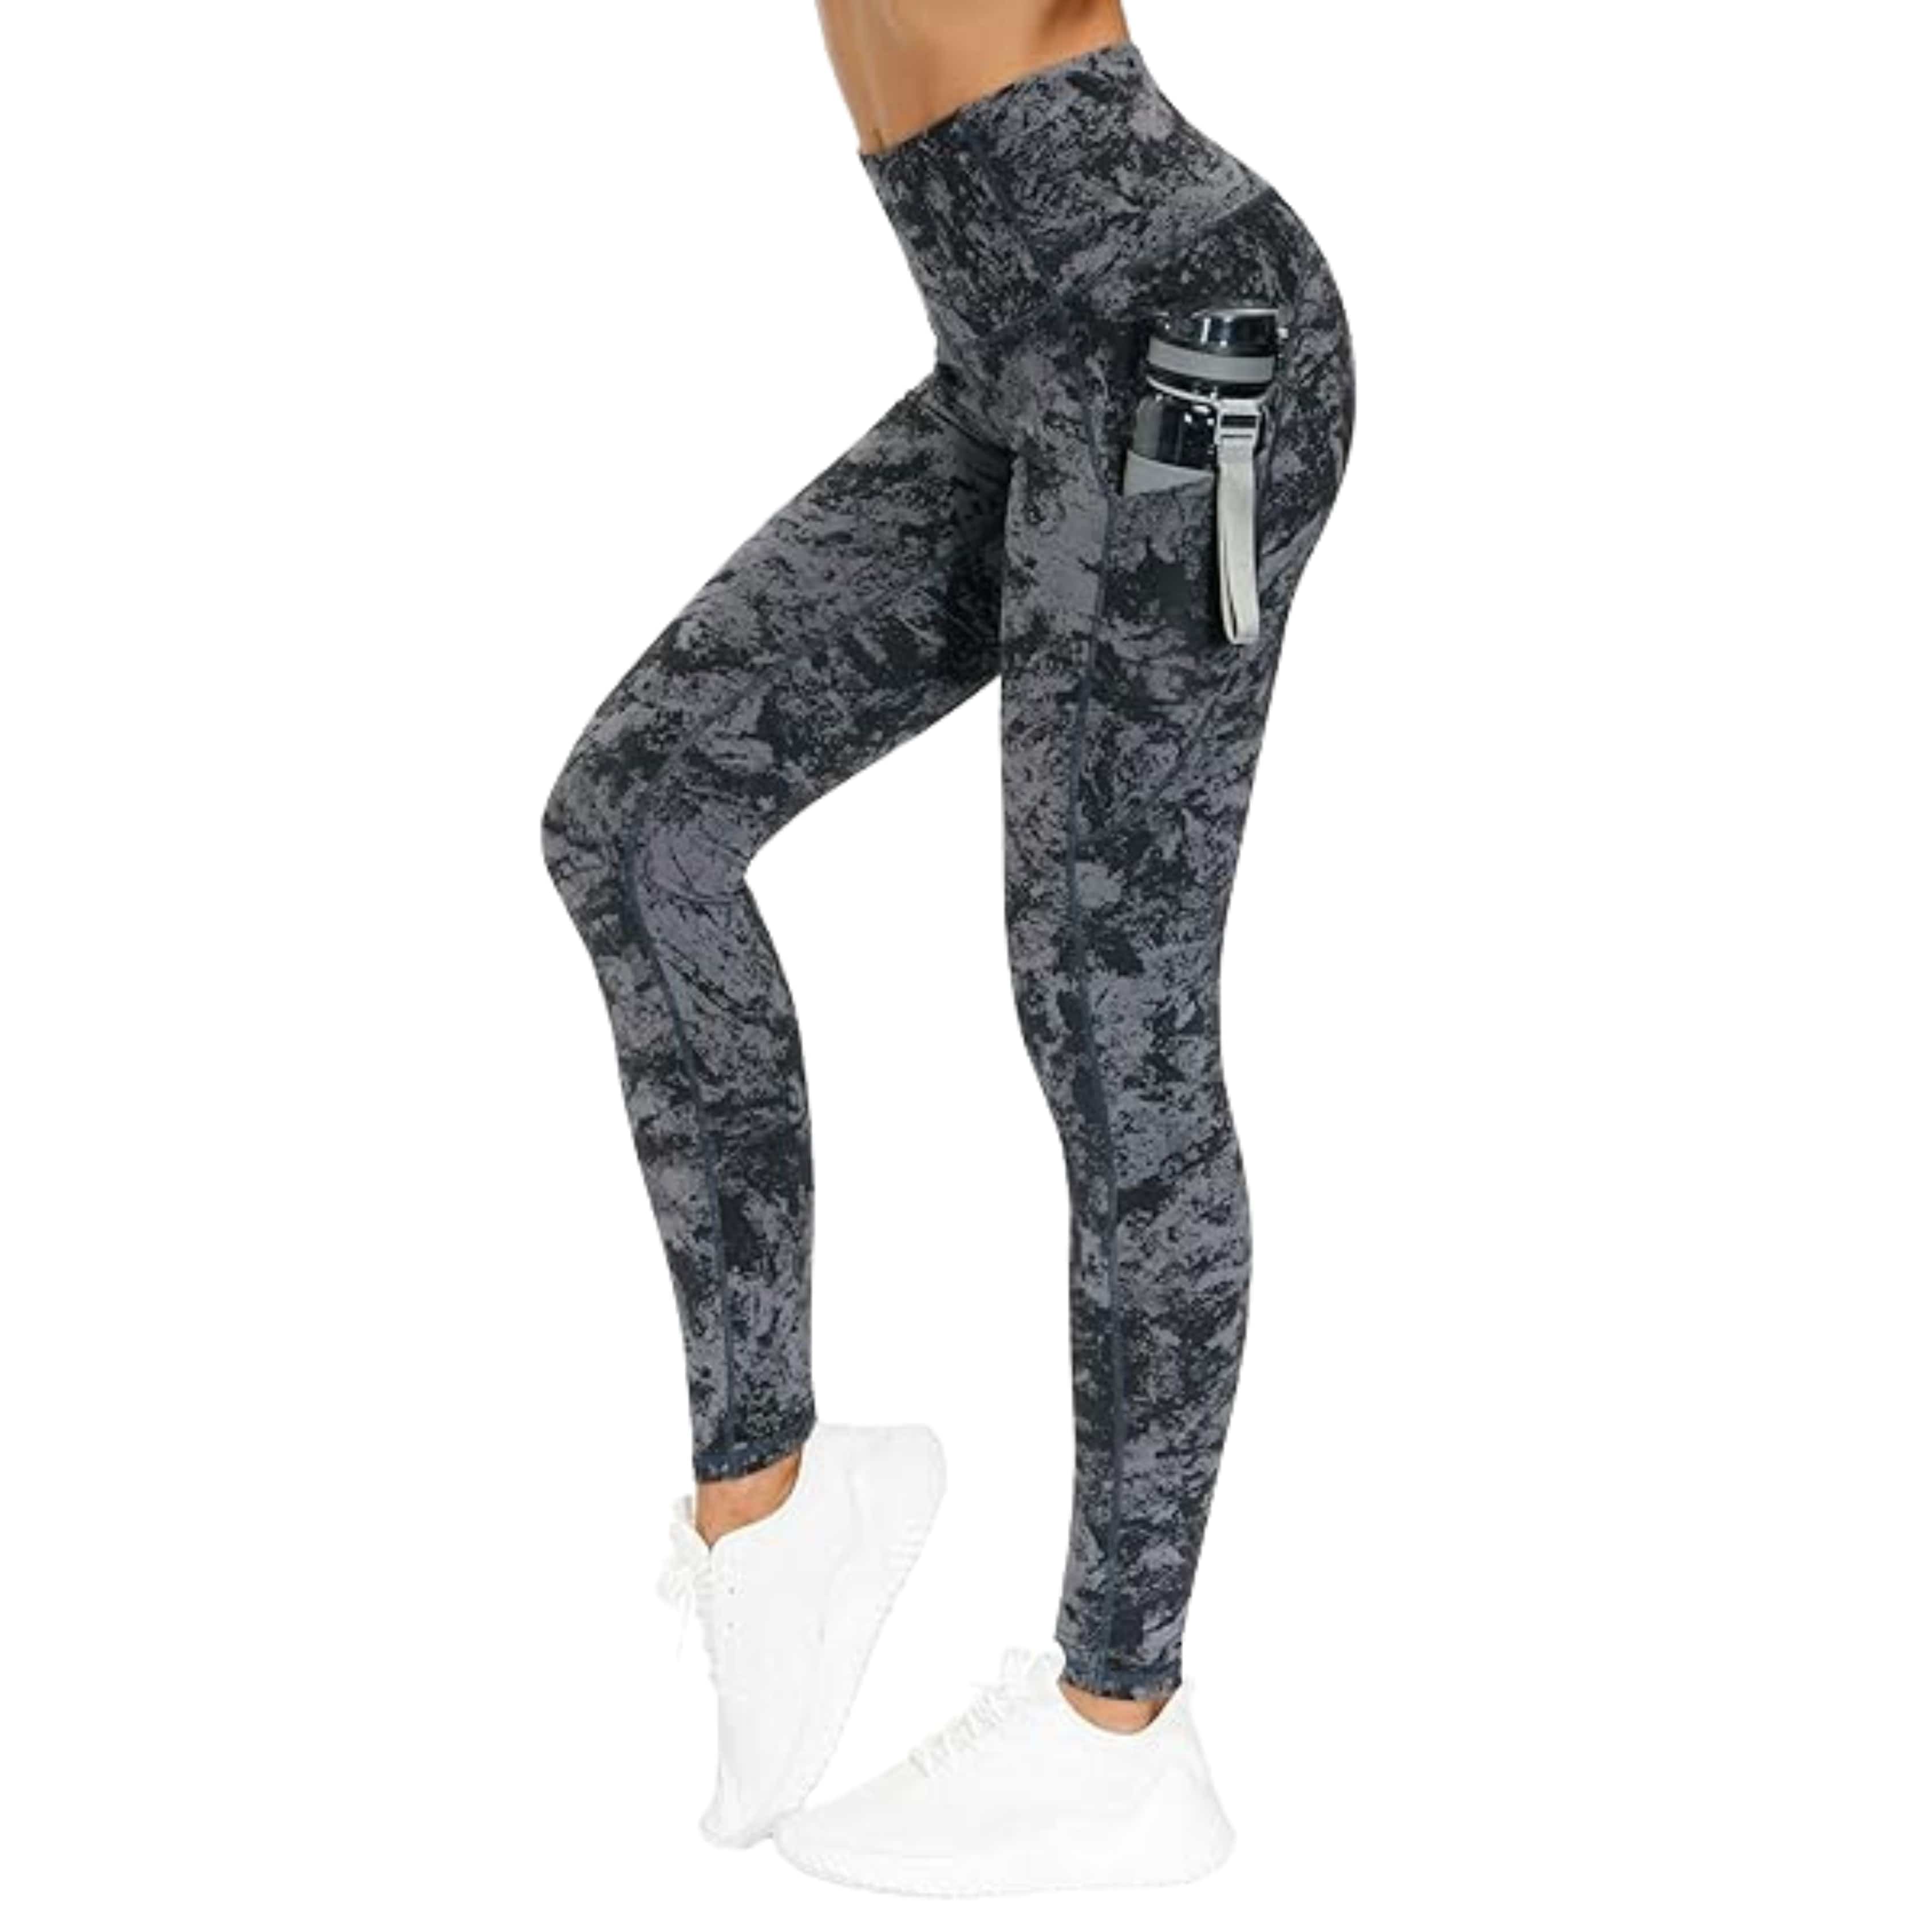 Our Point of View on Dragon Fit High Waist Yoga Leggings From